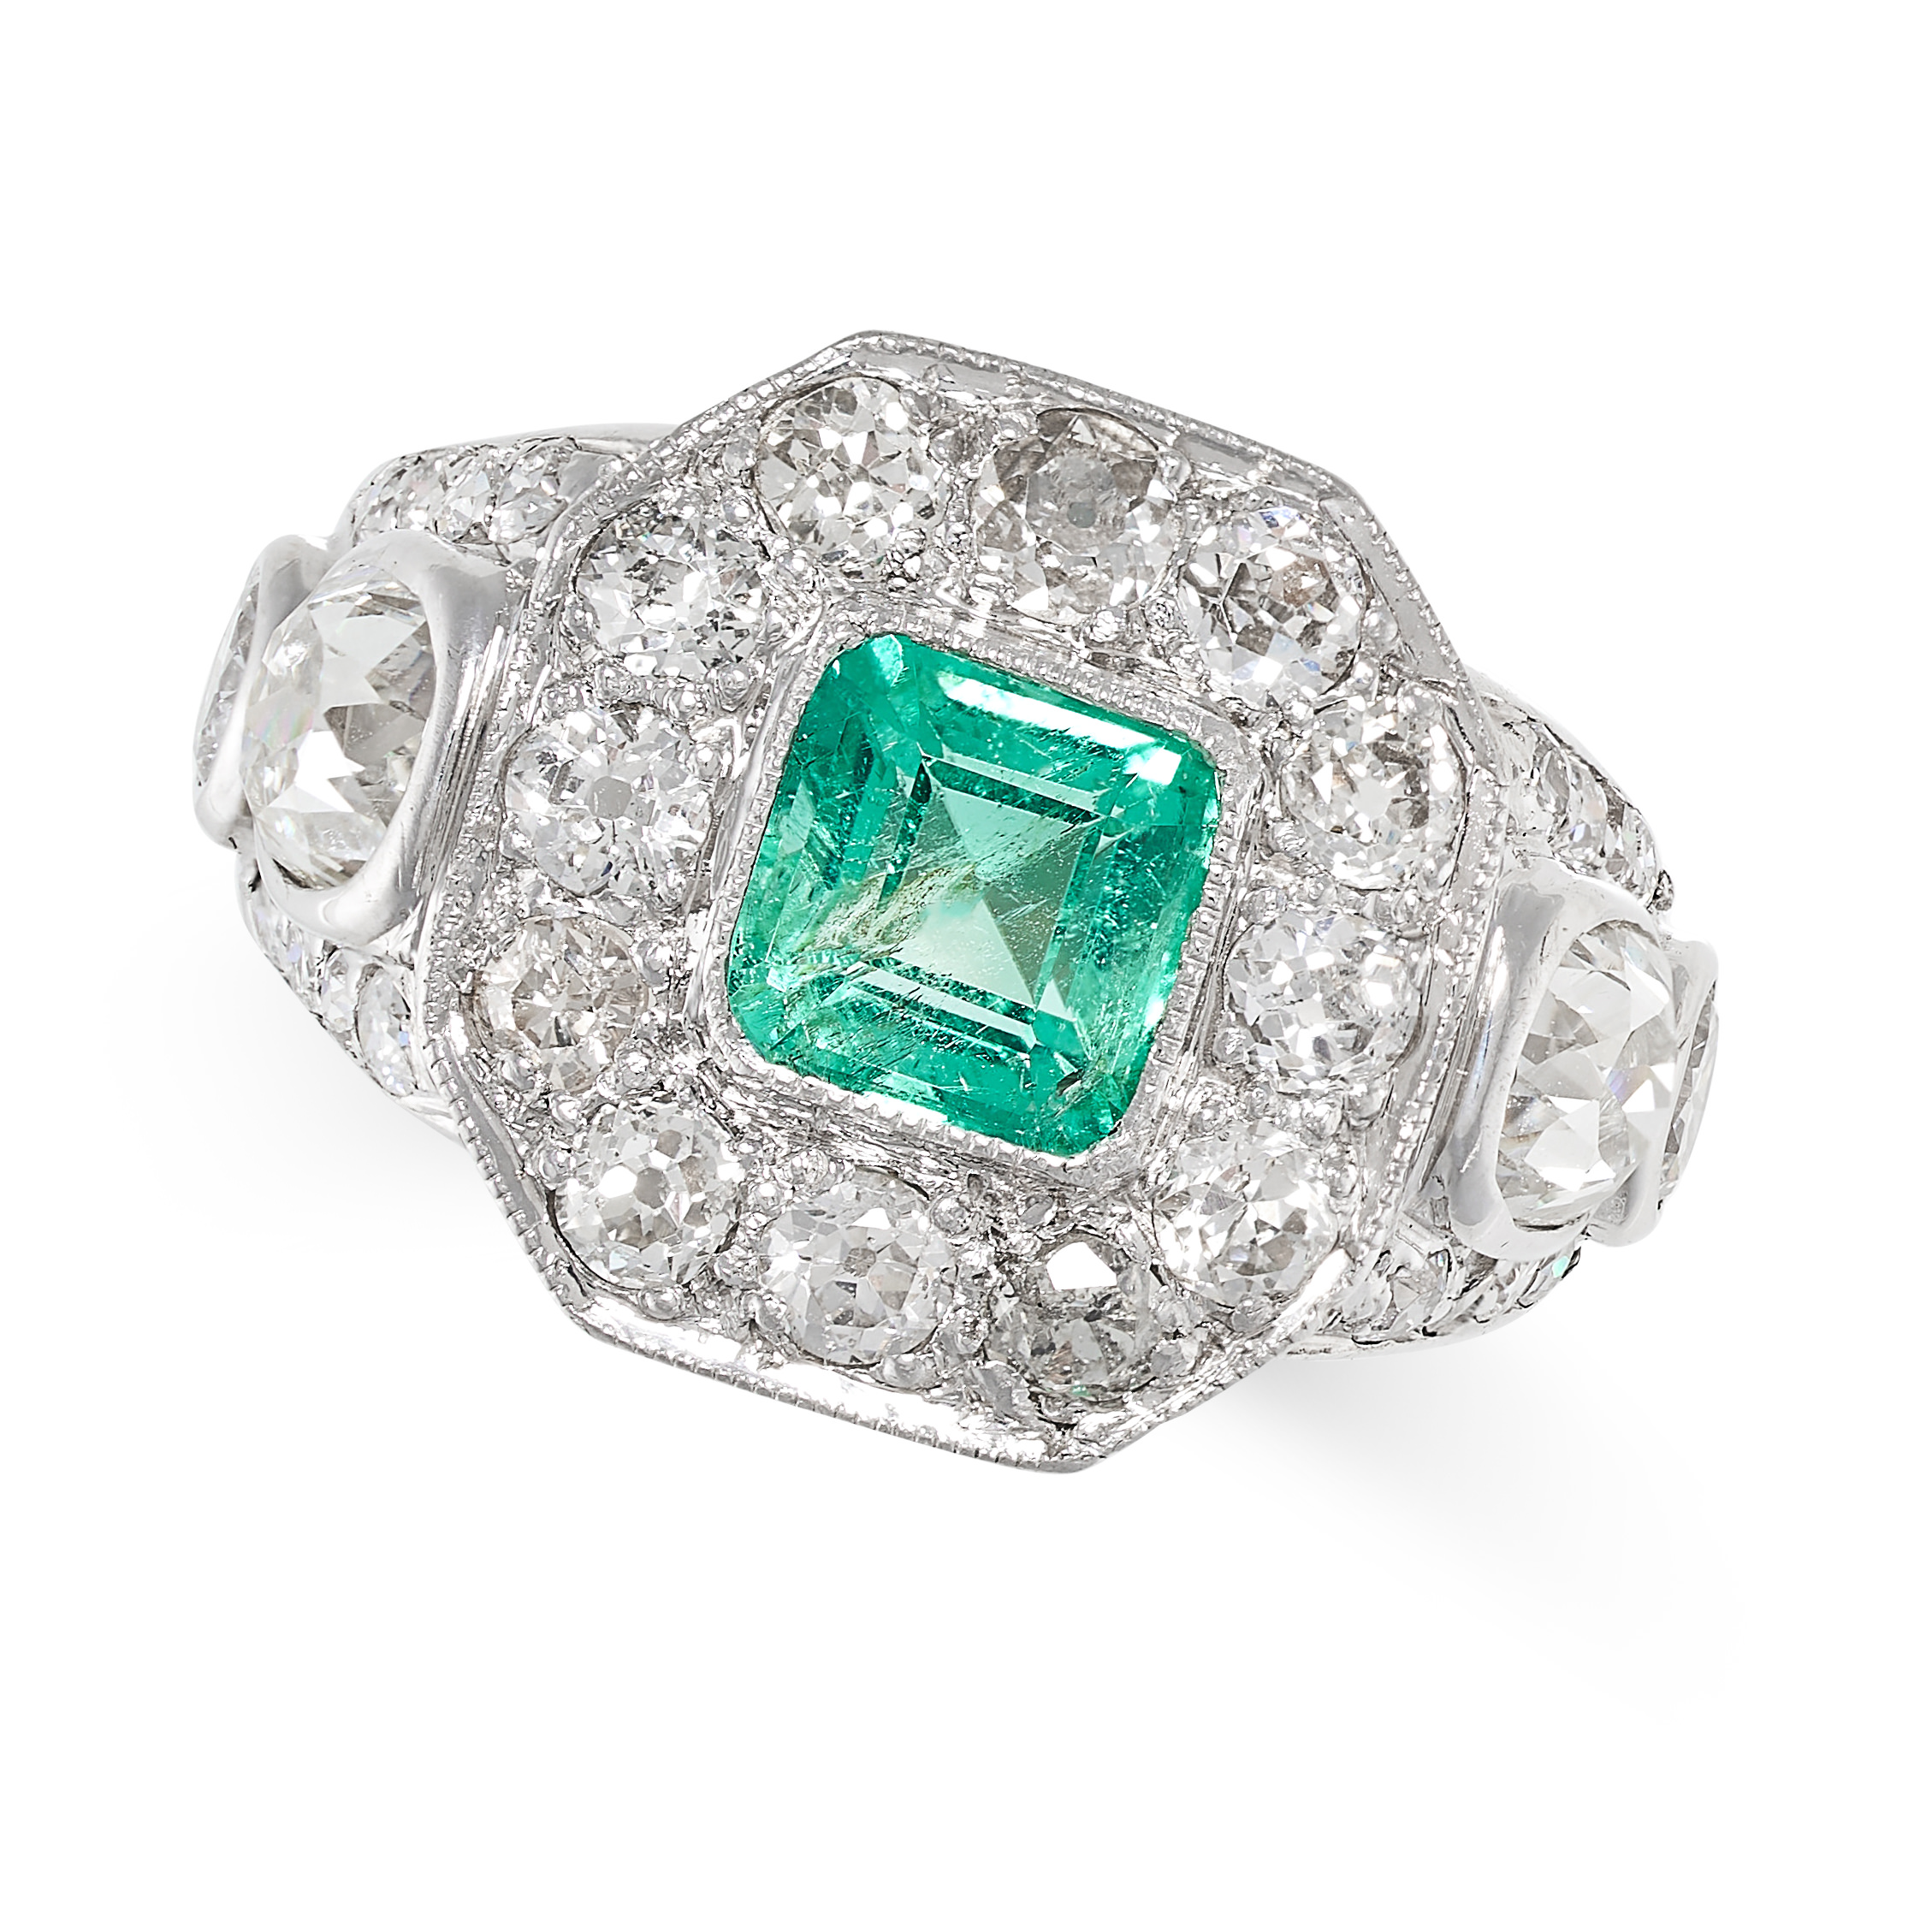 A COLOMBIAN EMERALD AND DIAMOND RING set with a step cut emerald of 1.14 carats in a border of old